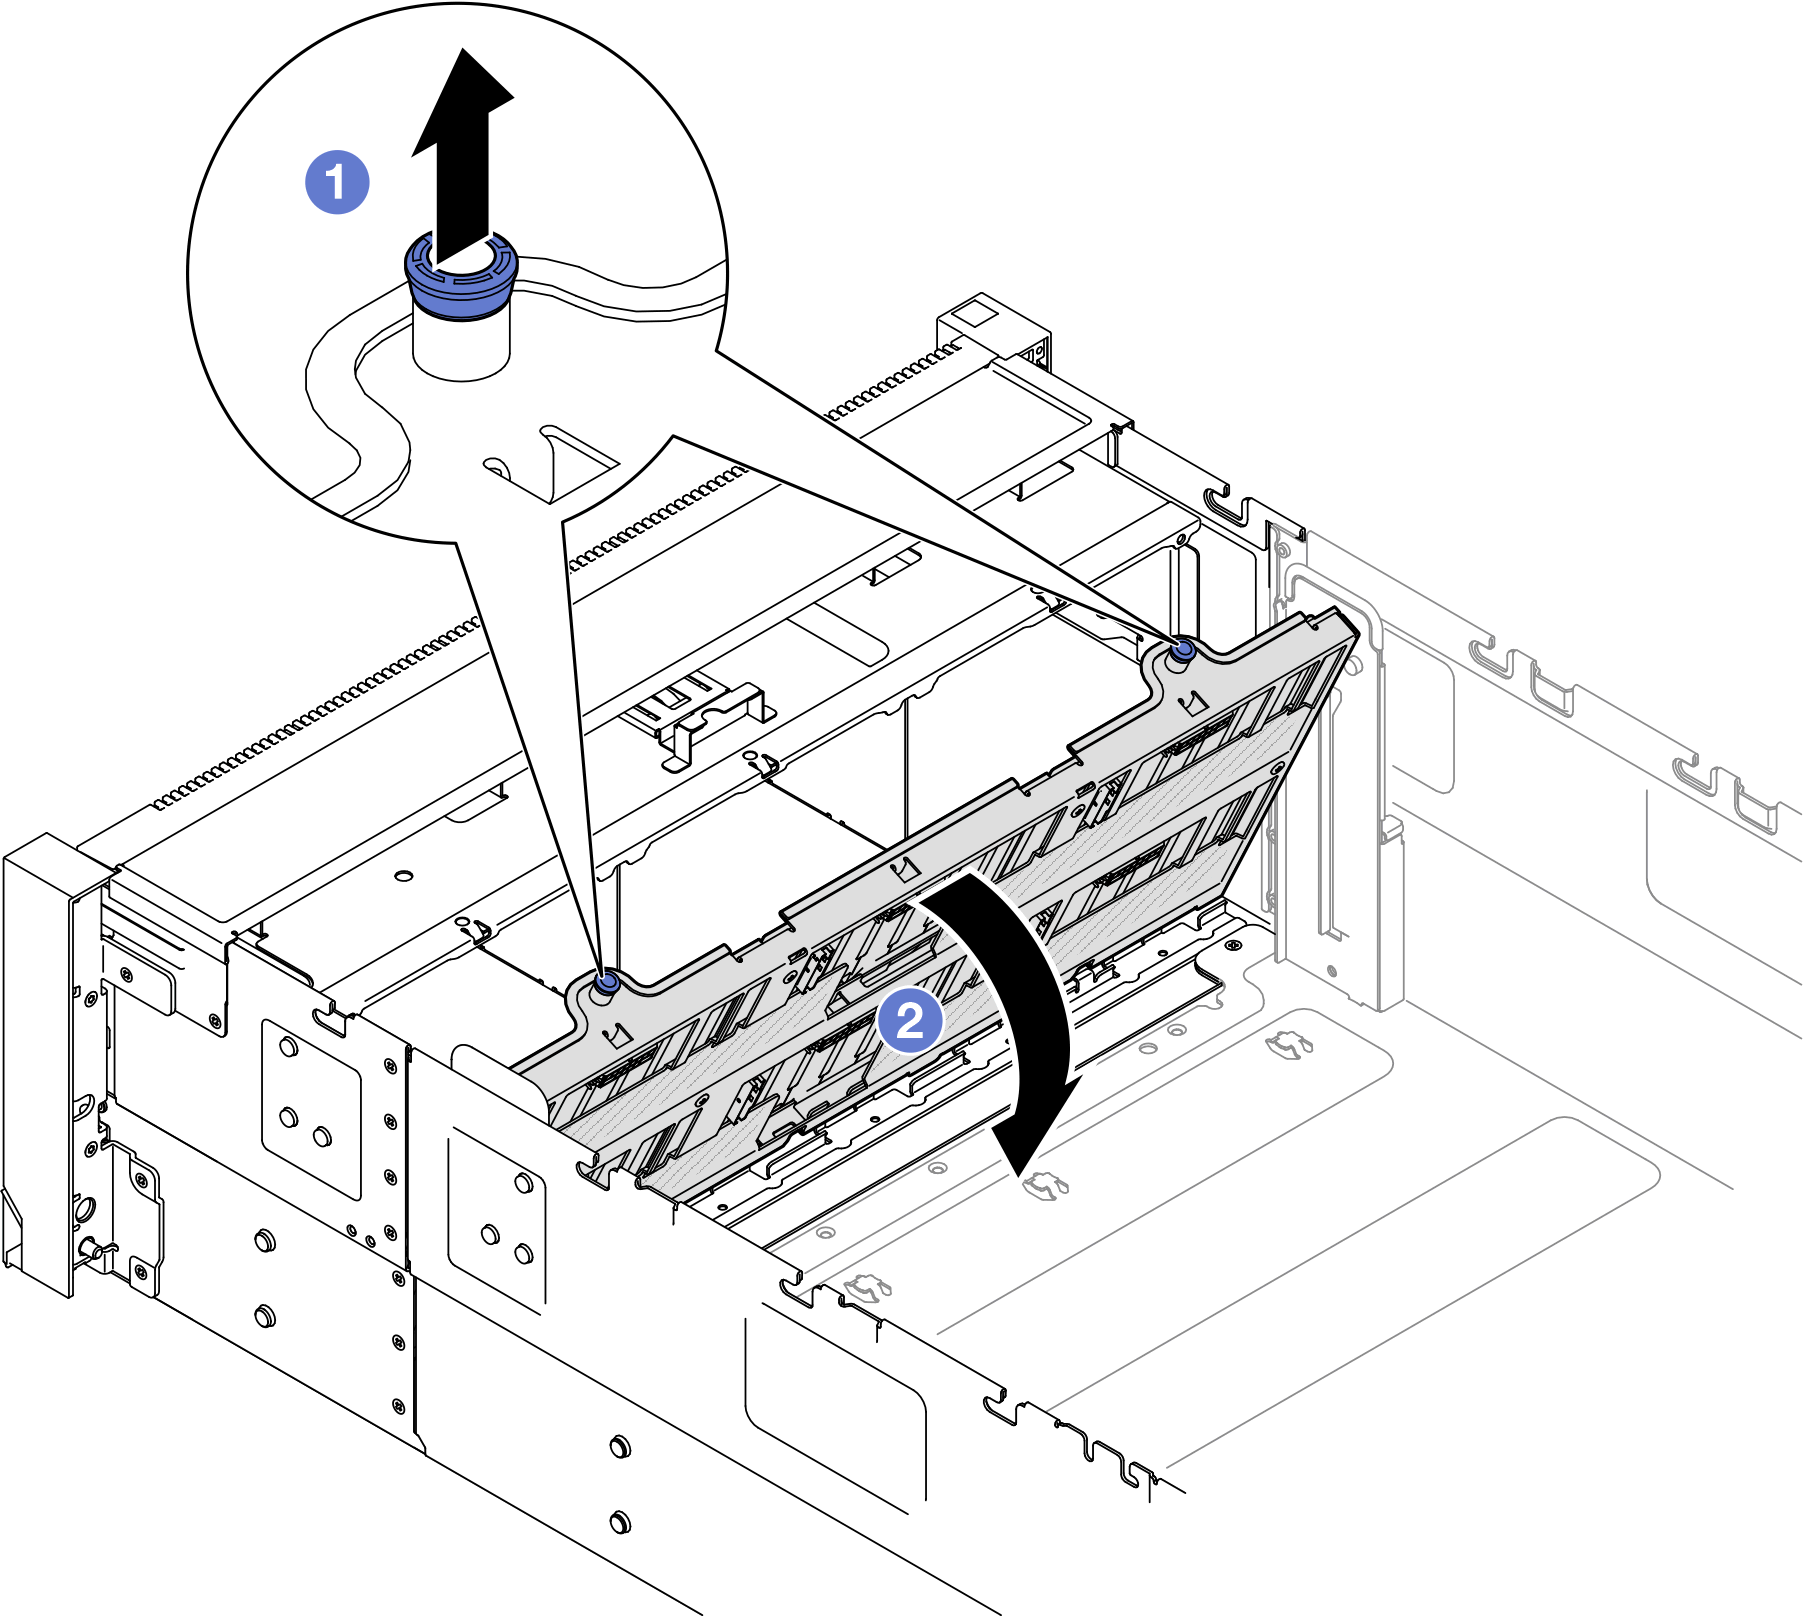 Removing drive backplane carrier assembly